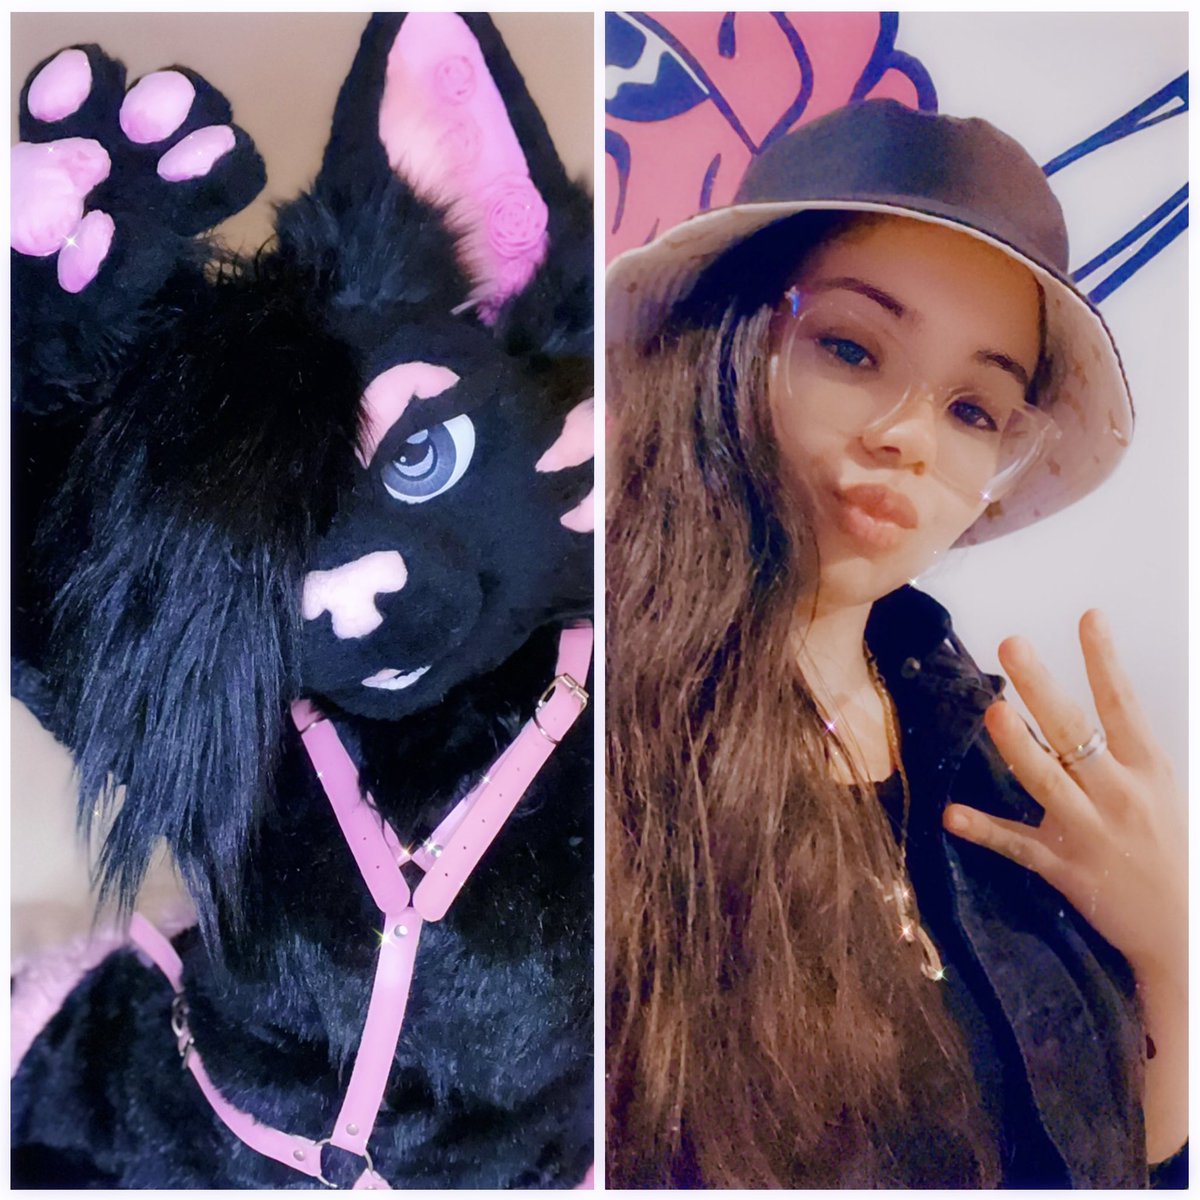 Suit vs Suiter! 
How to find me at Anthrocon💕
#furry #fursuiter